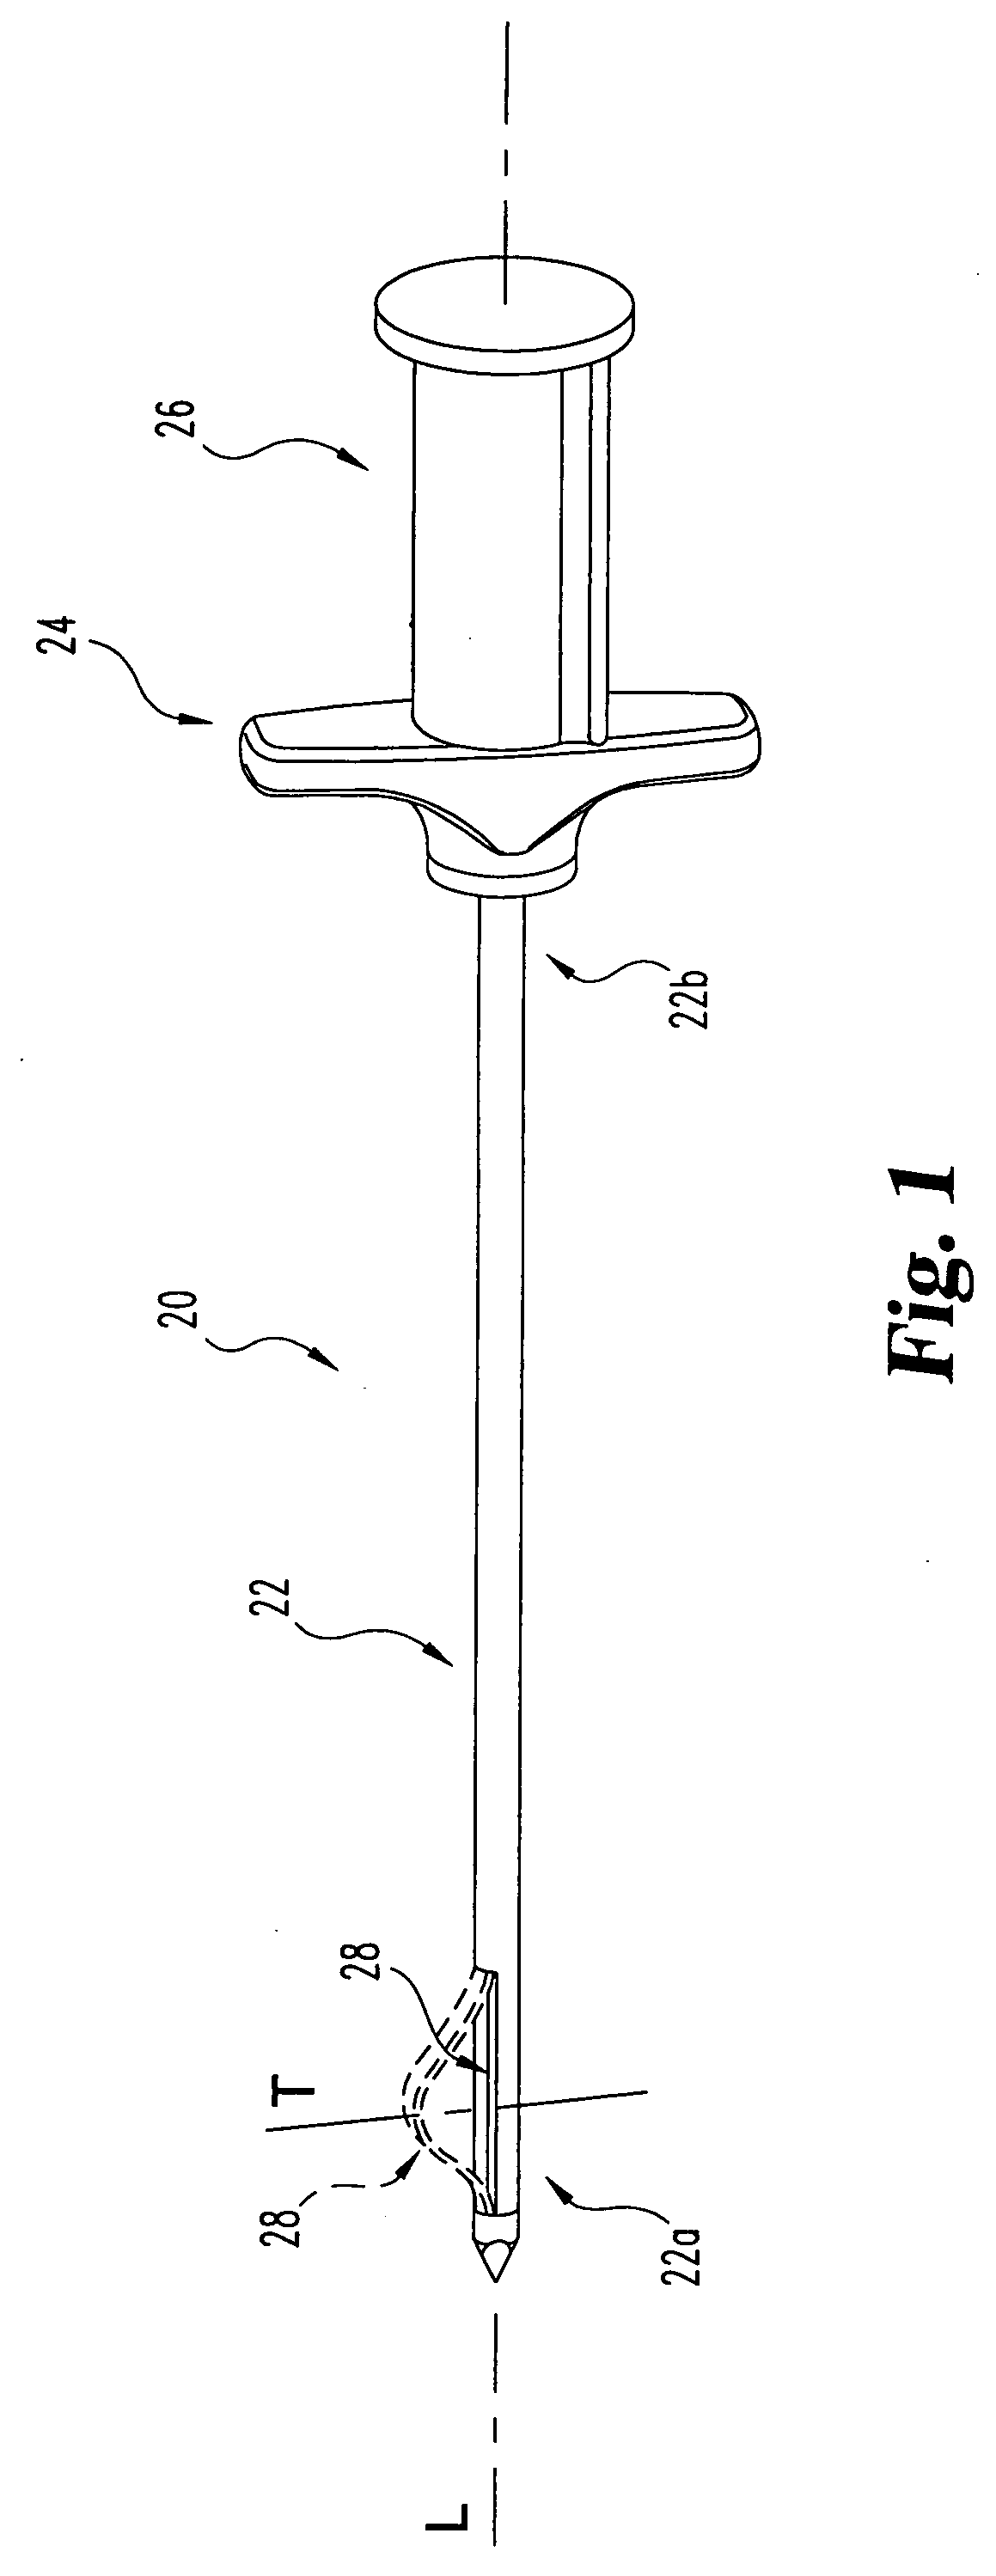 Surgical instrumentation and method for treatment of a spinal structure